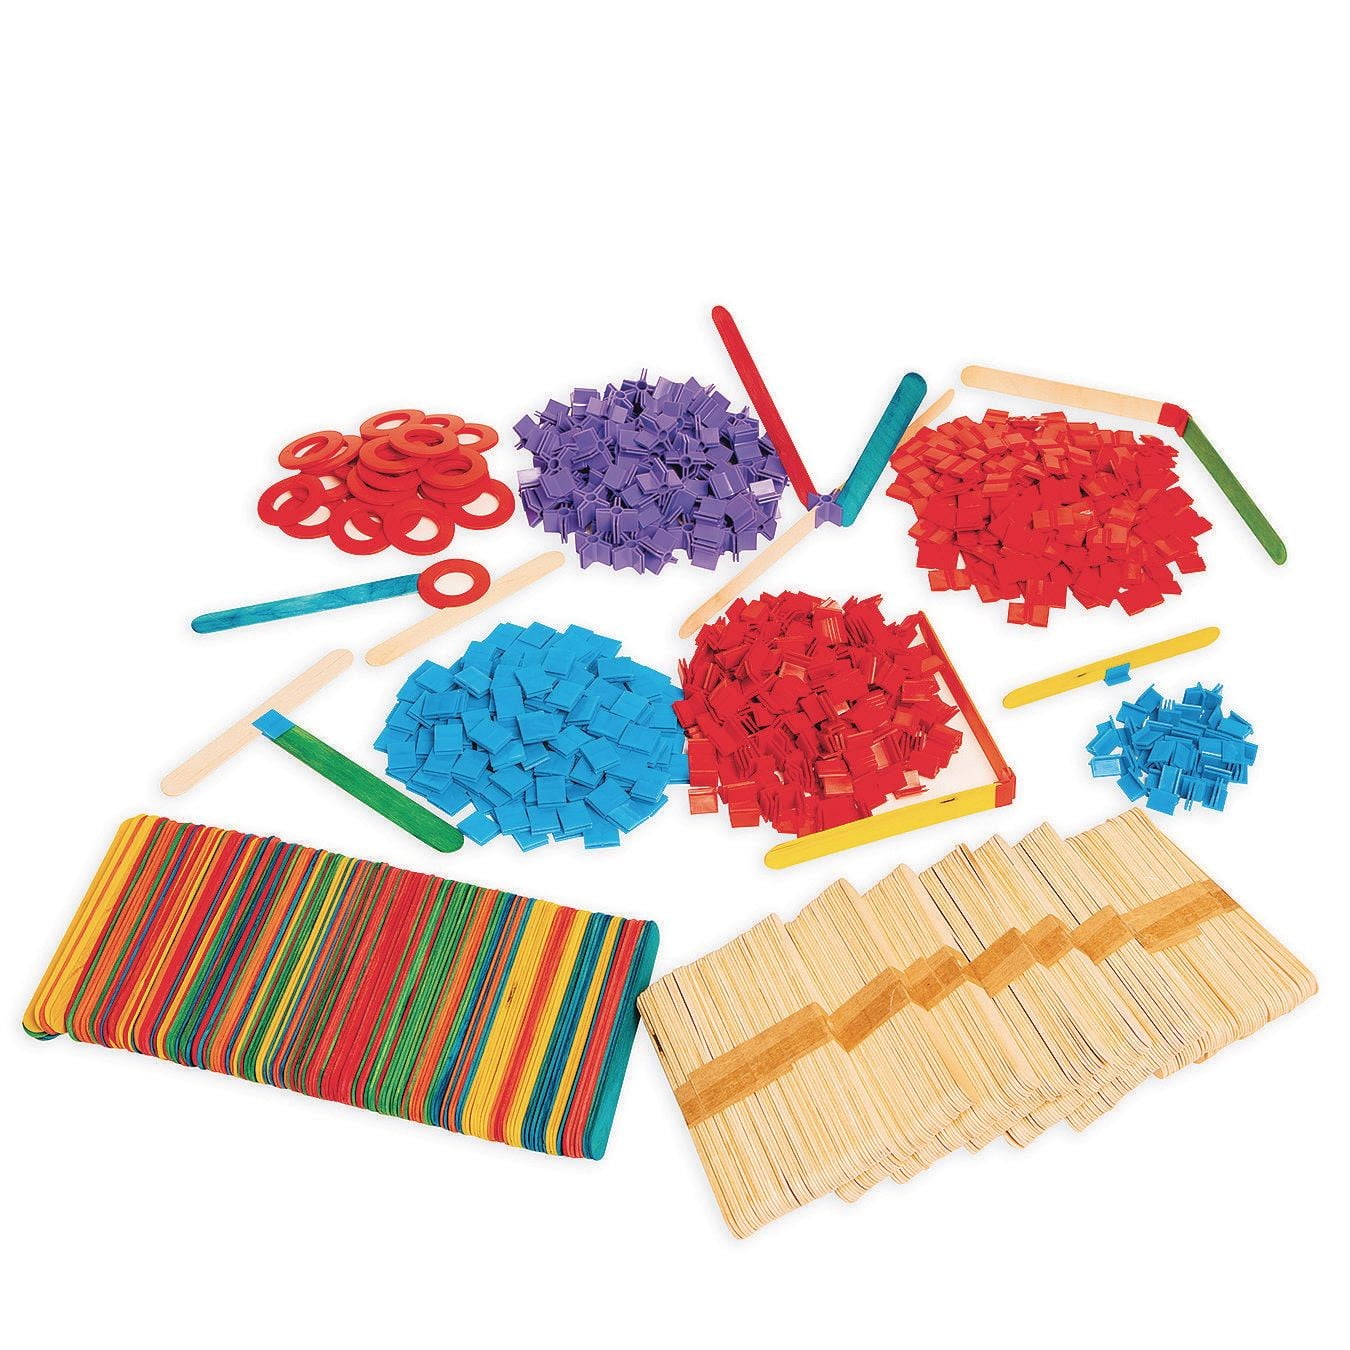 Craft Stick Loom - Pacon Creative Products